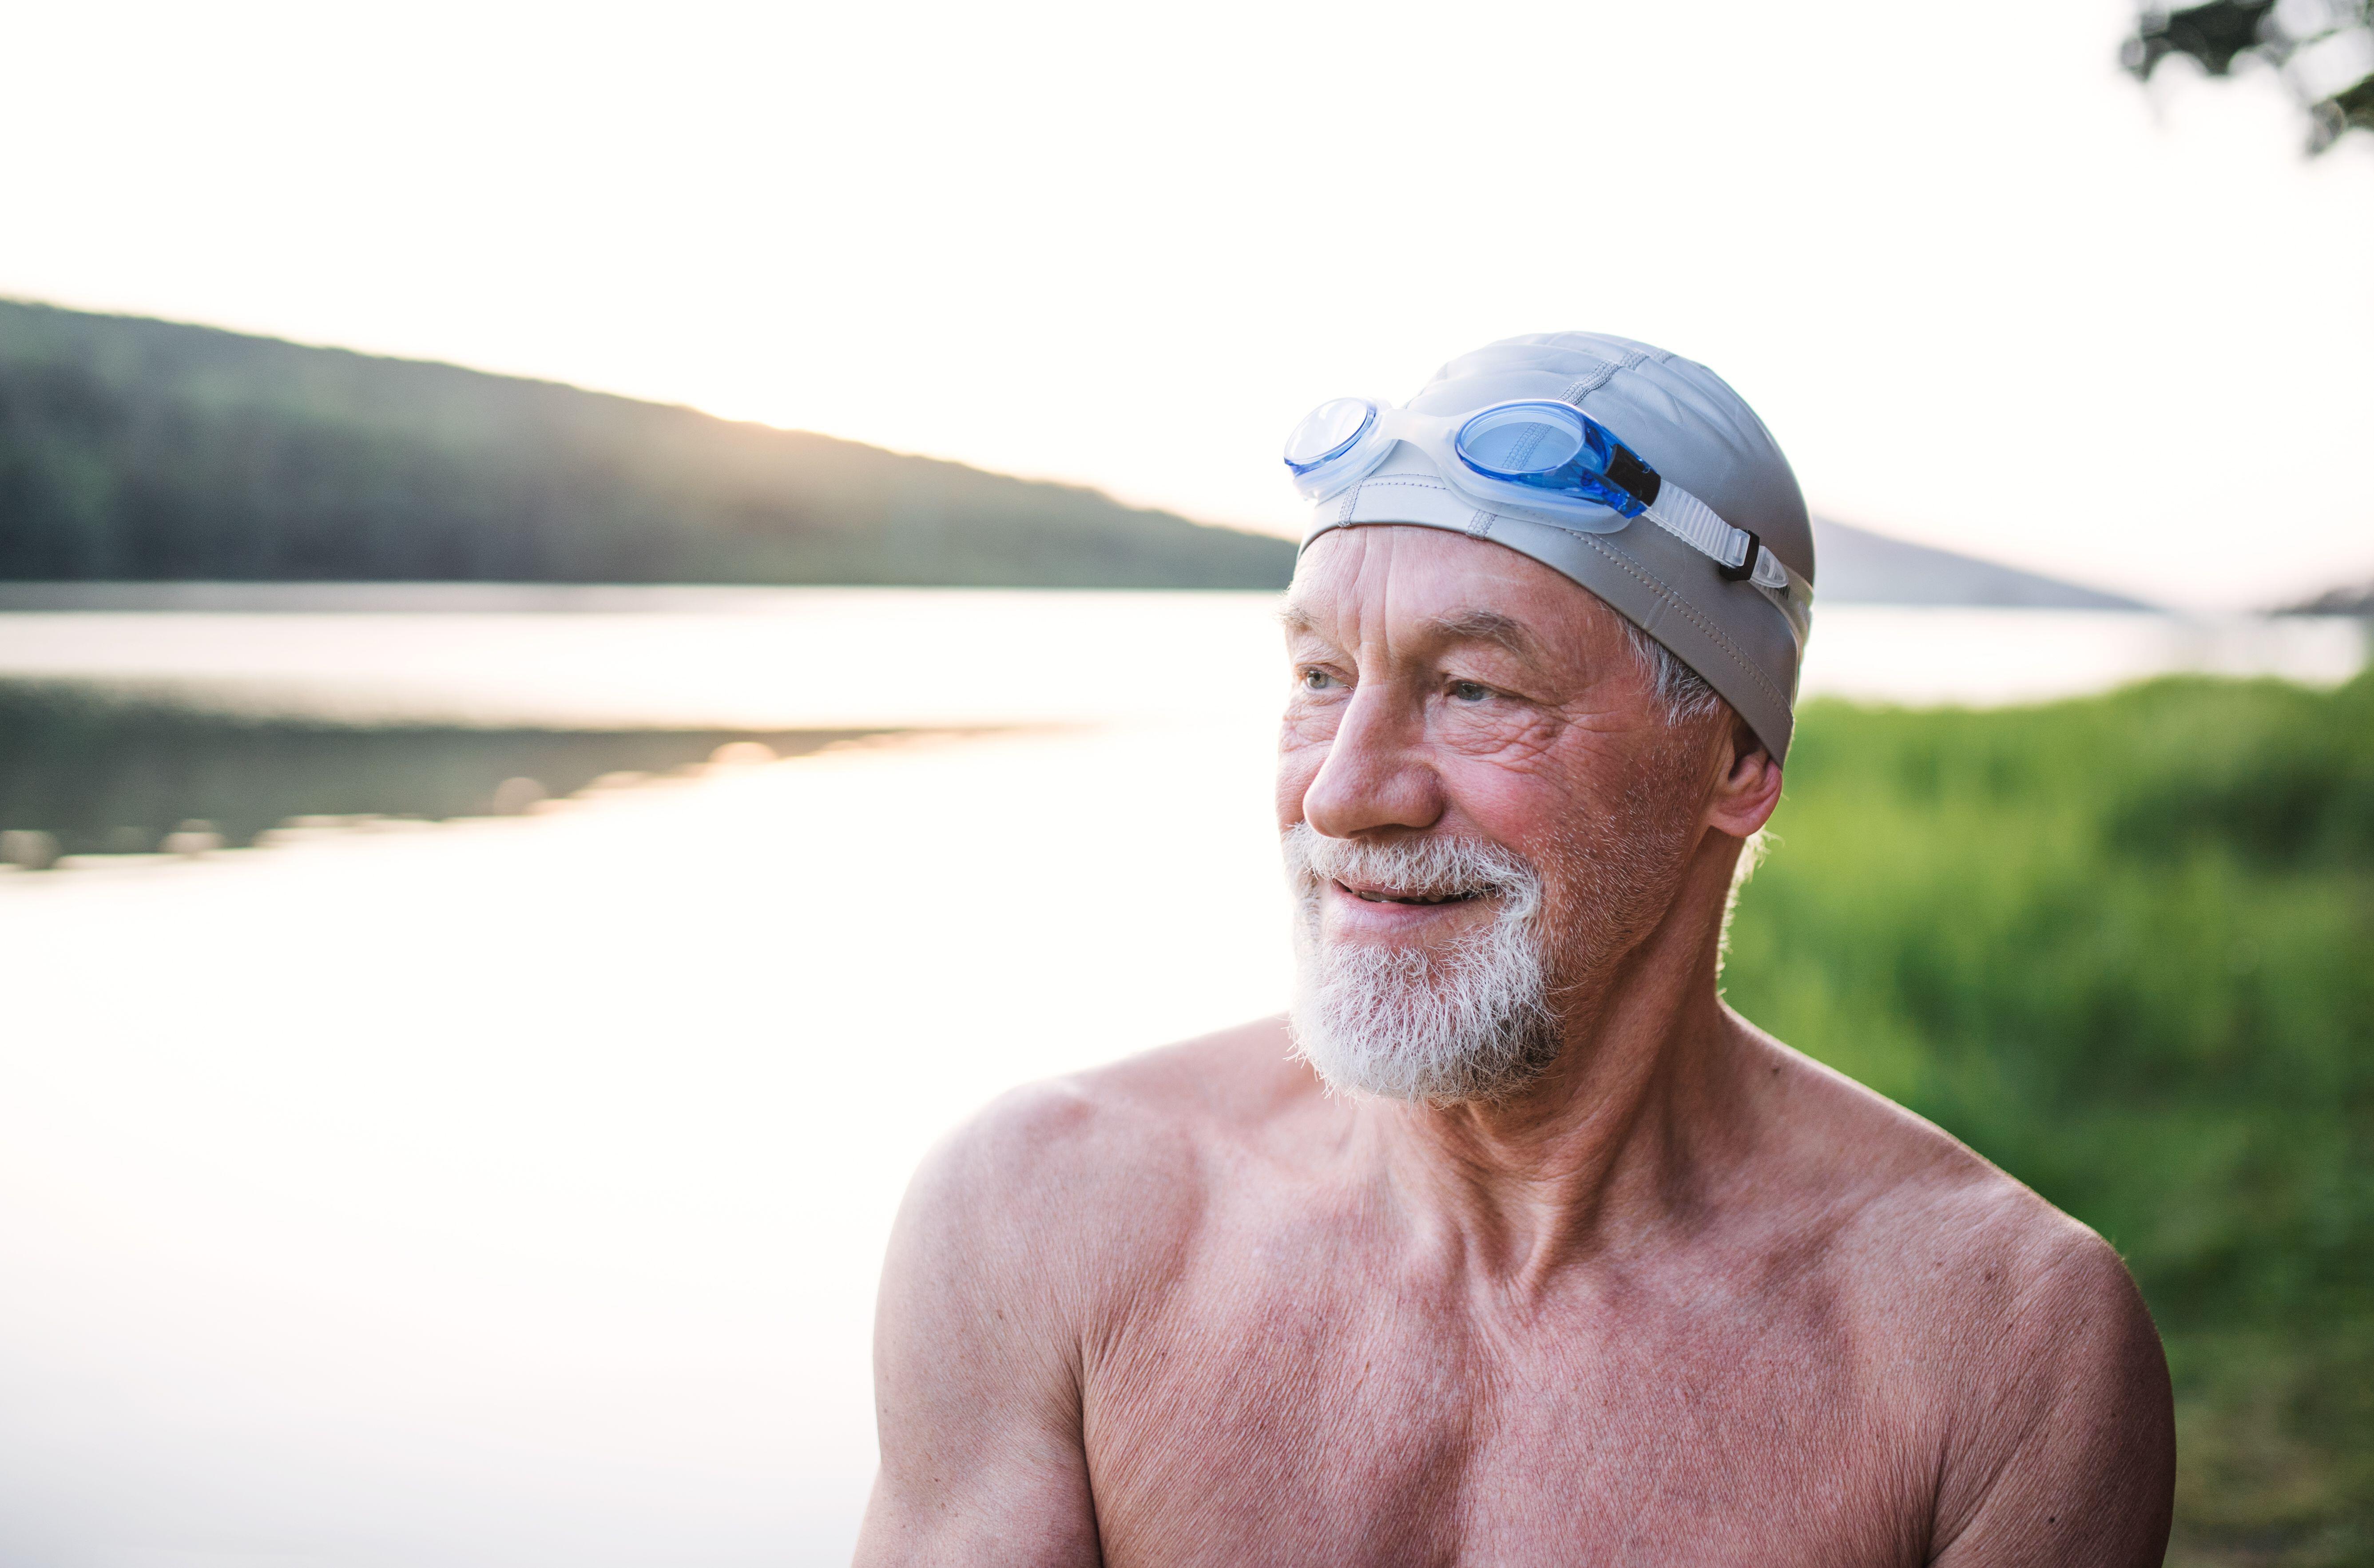 Mature man next to a lake, wearing swimming cap and goggles